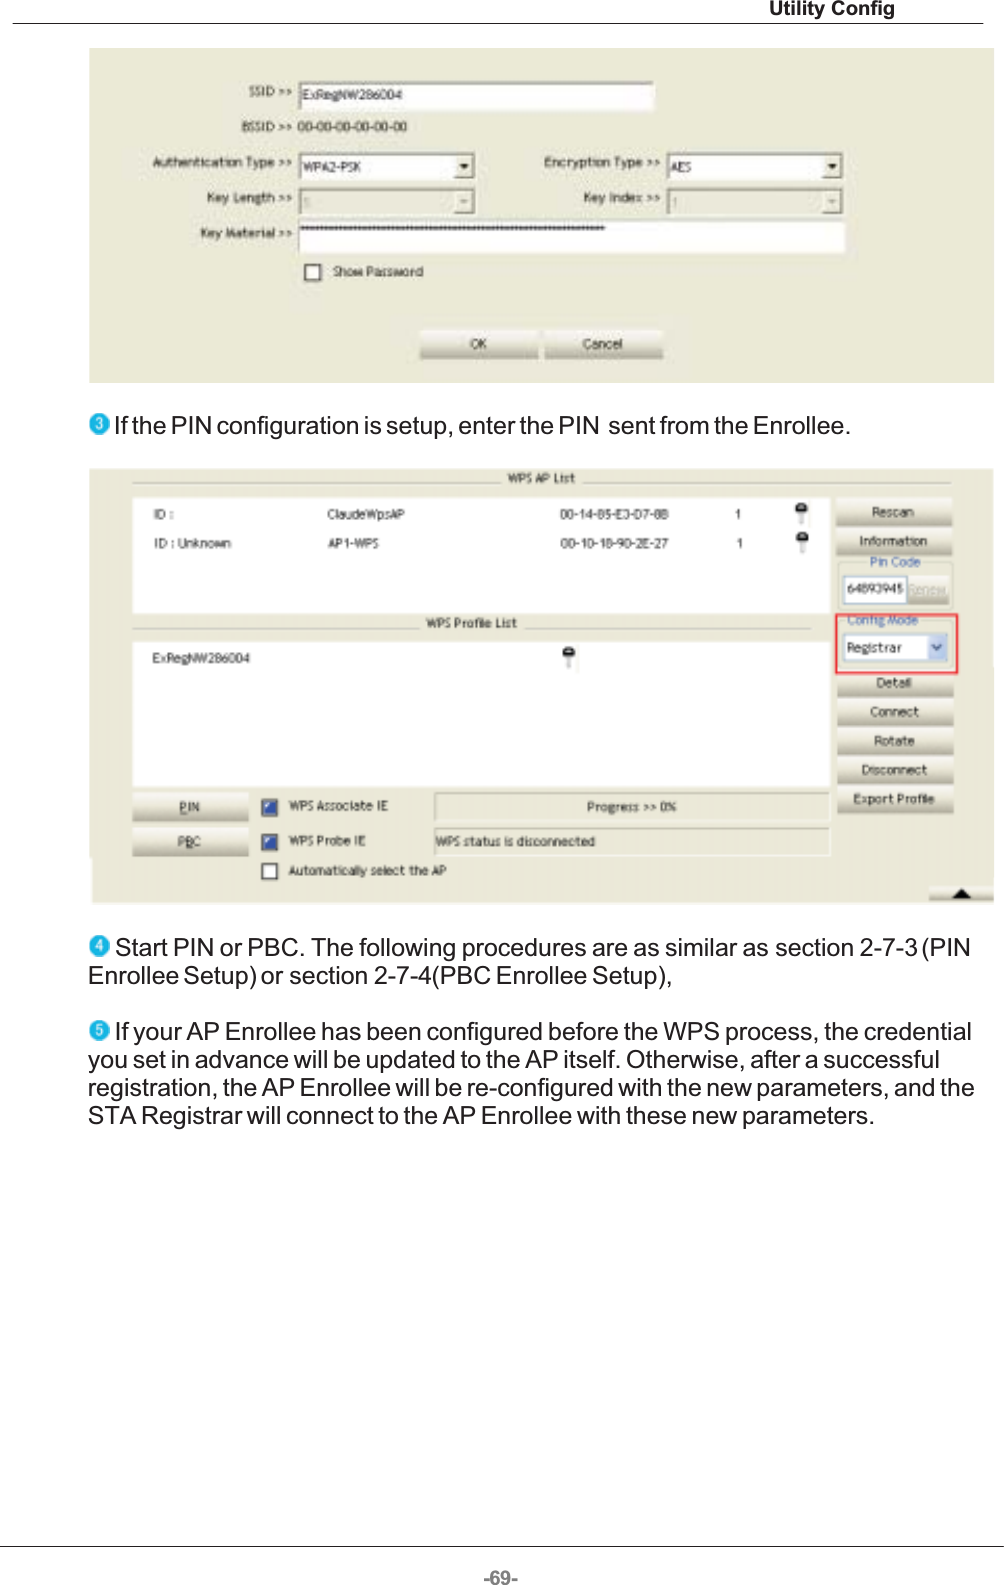 Utility Config-69-  If the PIN configuration is setup, enter the PIN  sent from the Enrollee.   Start PIN or PBC. The following procedures are as similar as section 2-7-3 (PINEnrollee Setup) or section 2-7-4(PBC Enrollee Setup),  If your AP Enrollee has been configured before the WPS process, the credentialyou set in advance will be updated to the AP itself. Otherwise, after a successfulregistration, the AP Enrollee will be re-configured with the new parameters, and theSTA Registrar will connect to the AP Enrollee with these new parameters. 